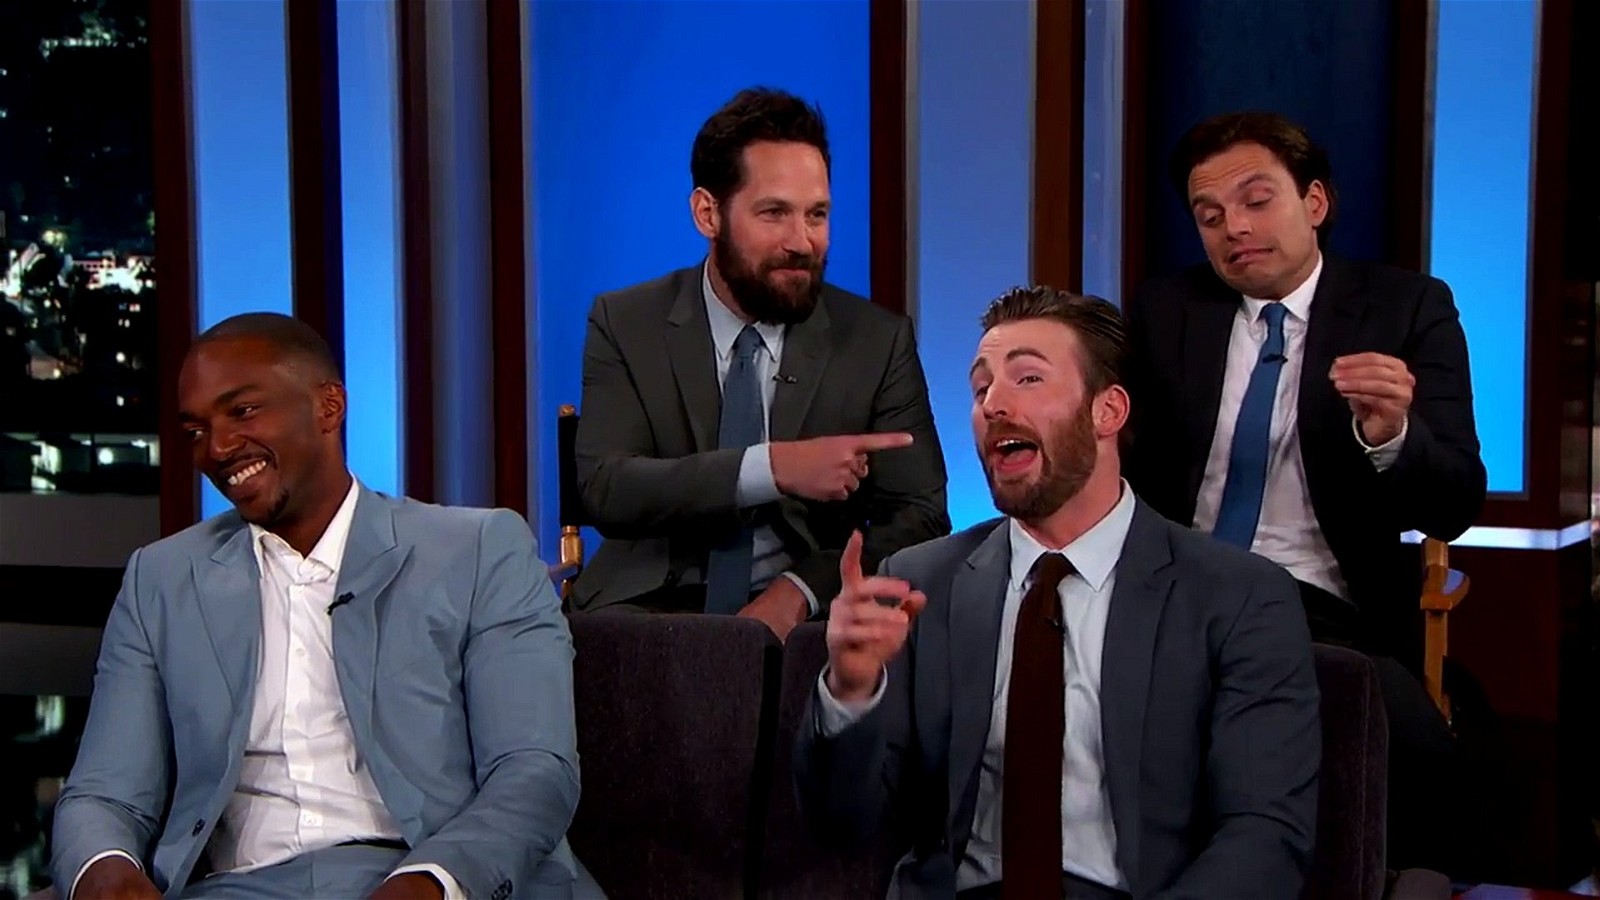 Paul Rudd and Sebastian Stan appear in Jimmy Kimmel's show along with Anthony Mackie and Chris Evans